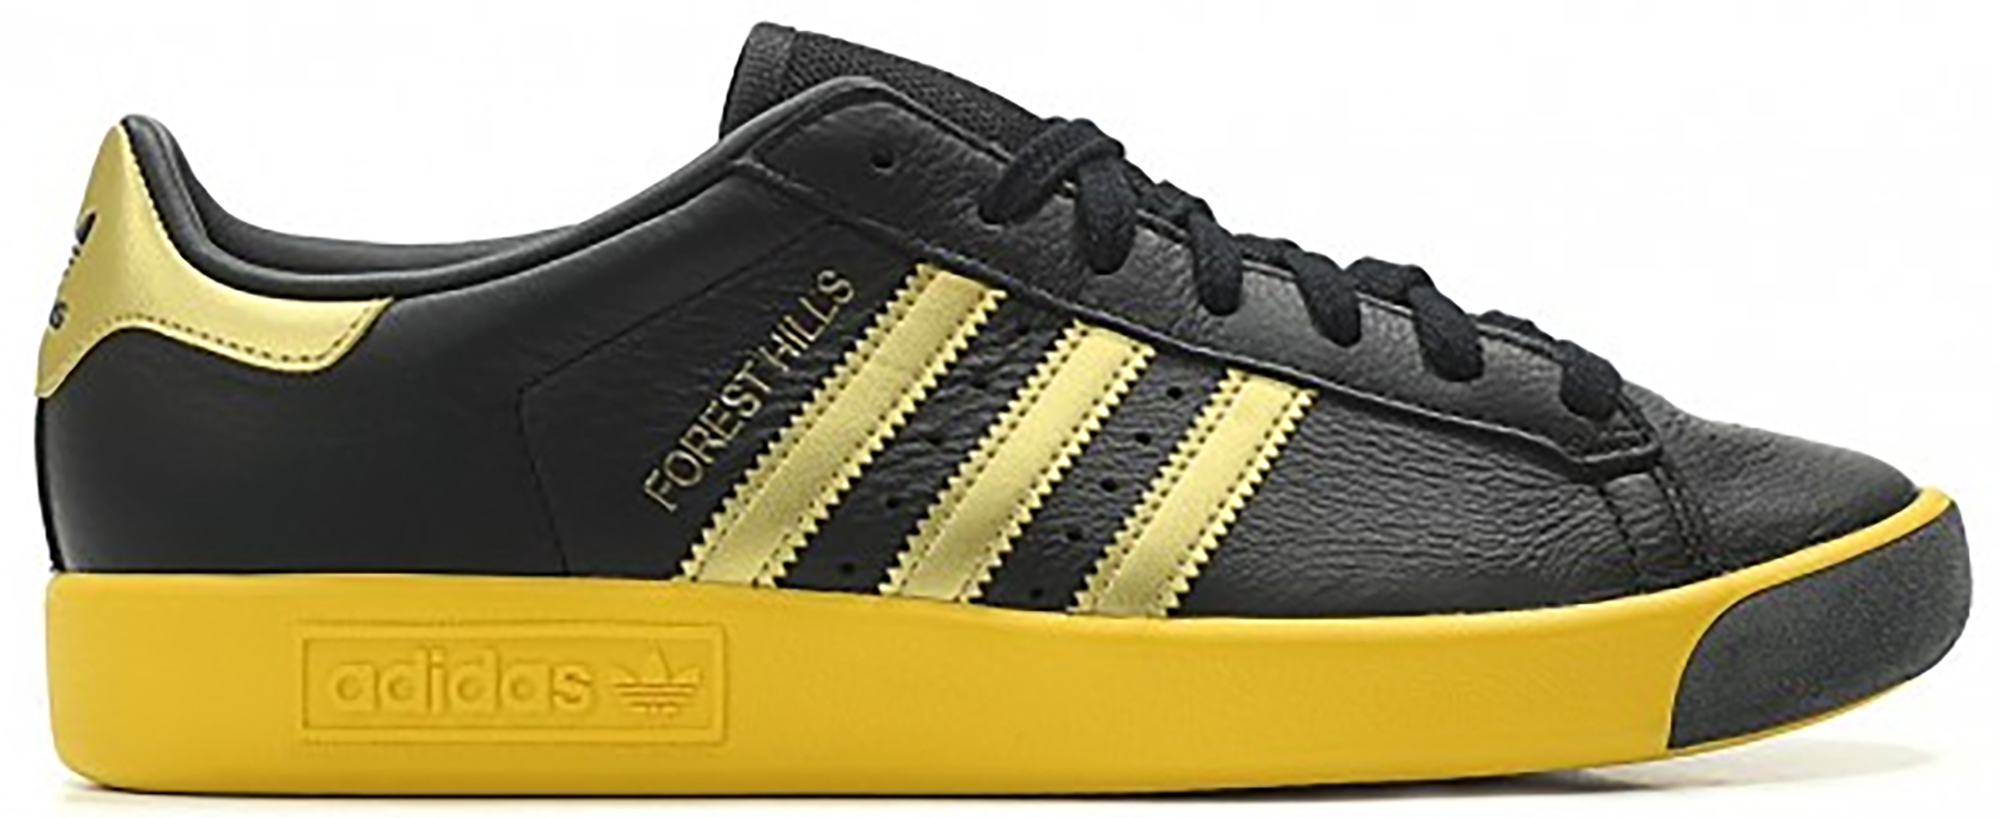 adidas Forest Hills Black Gold Yellow 